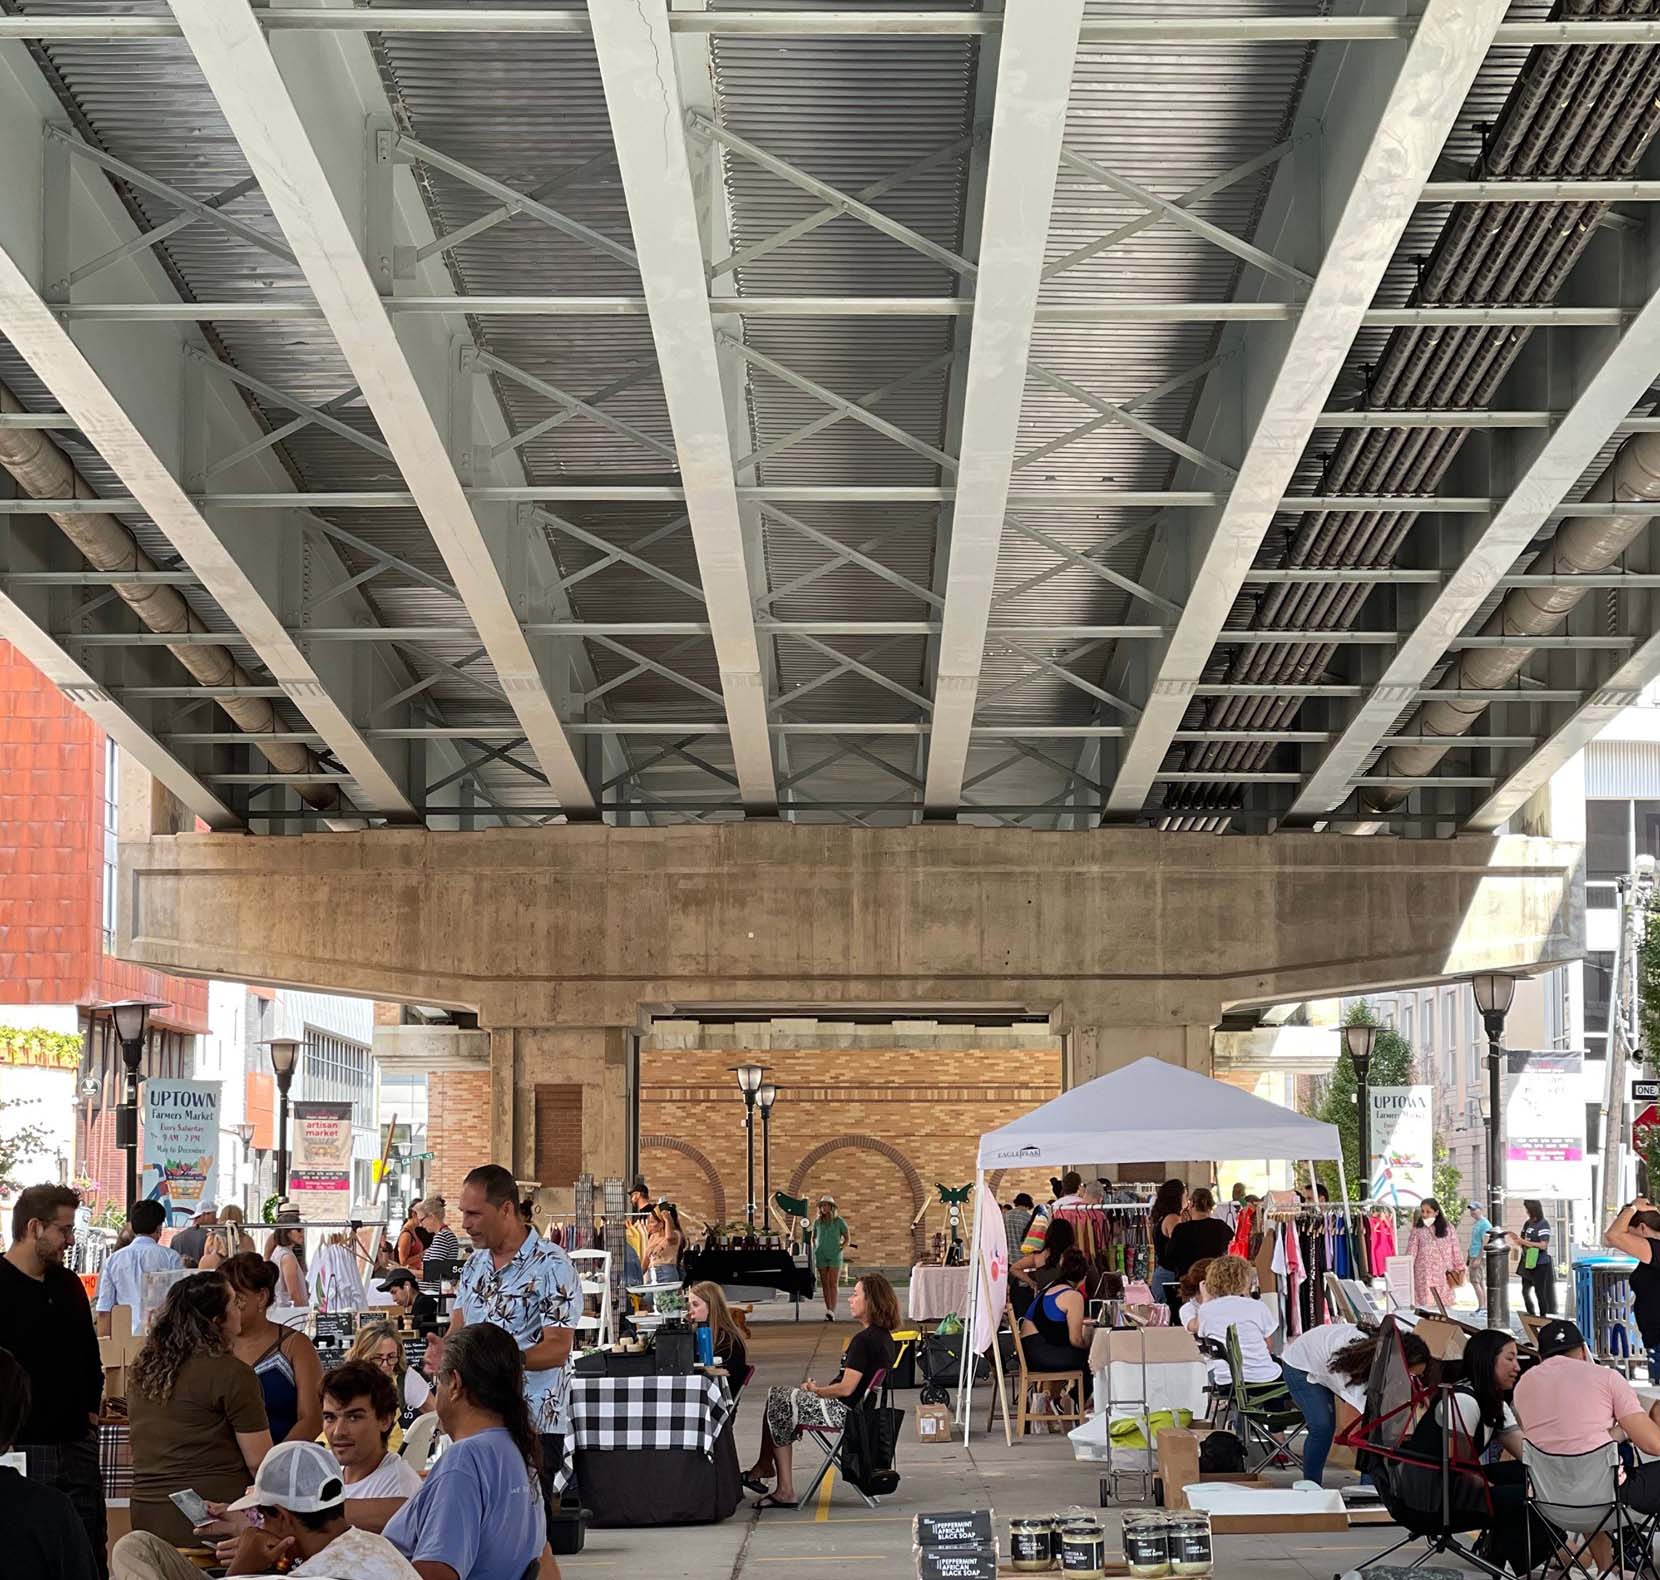 A crowded outdoor artisan market beneath a viaduct